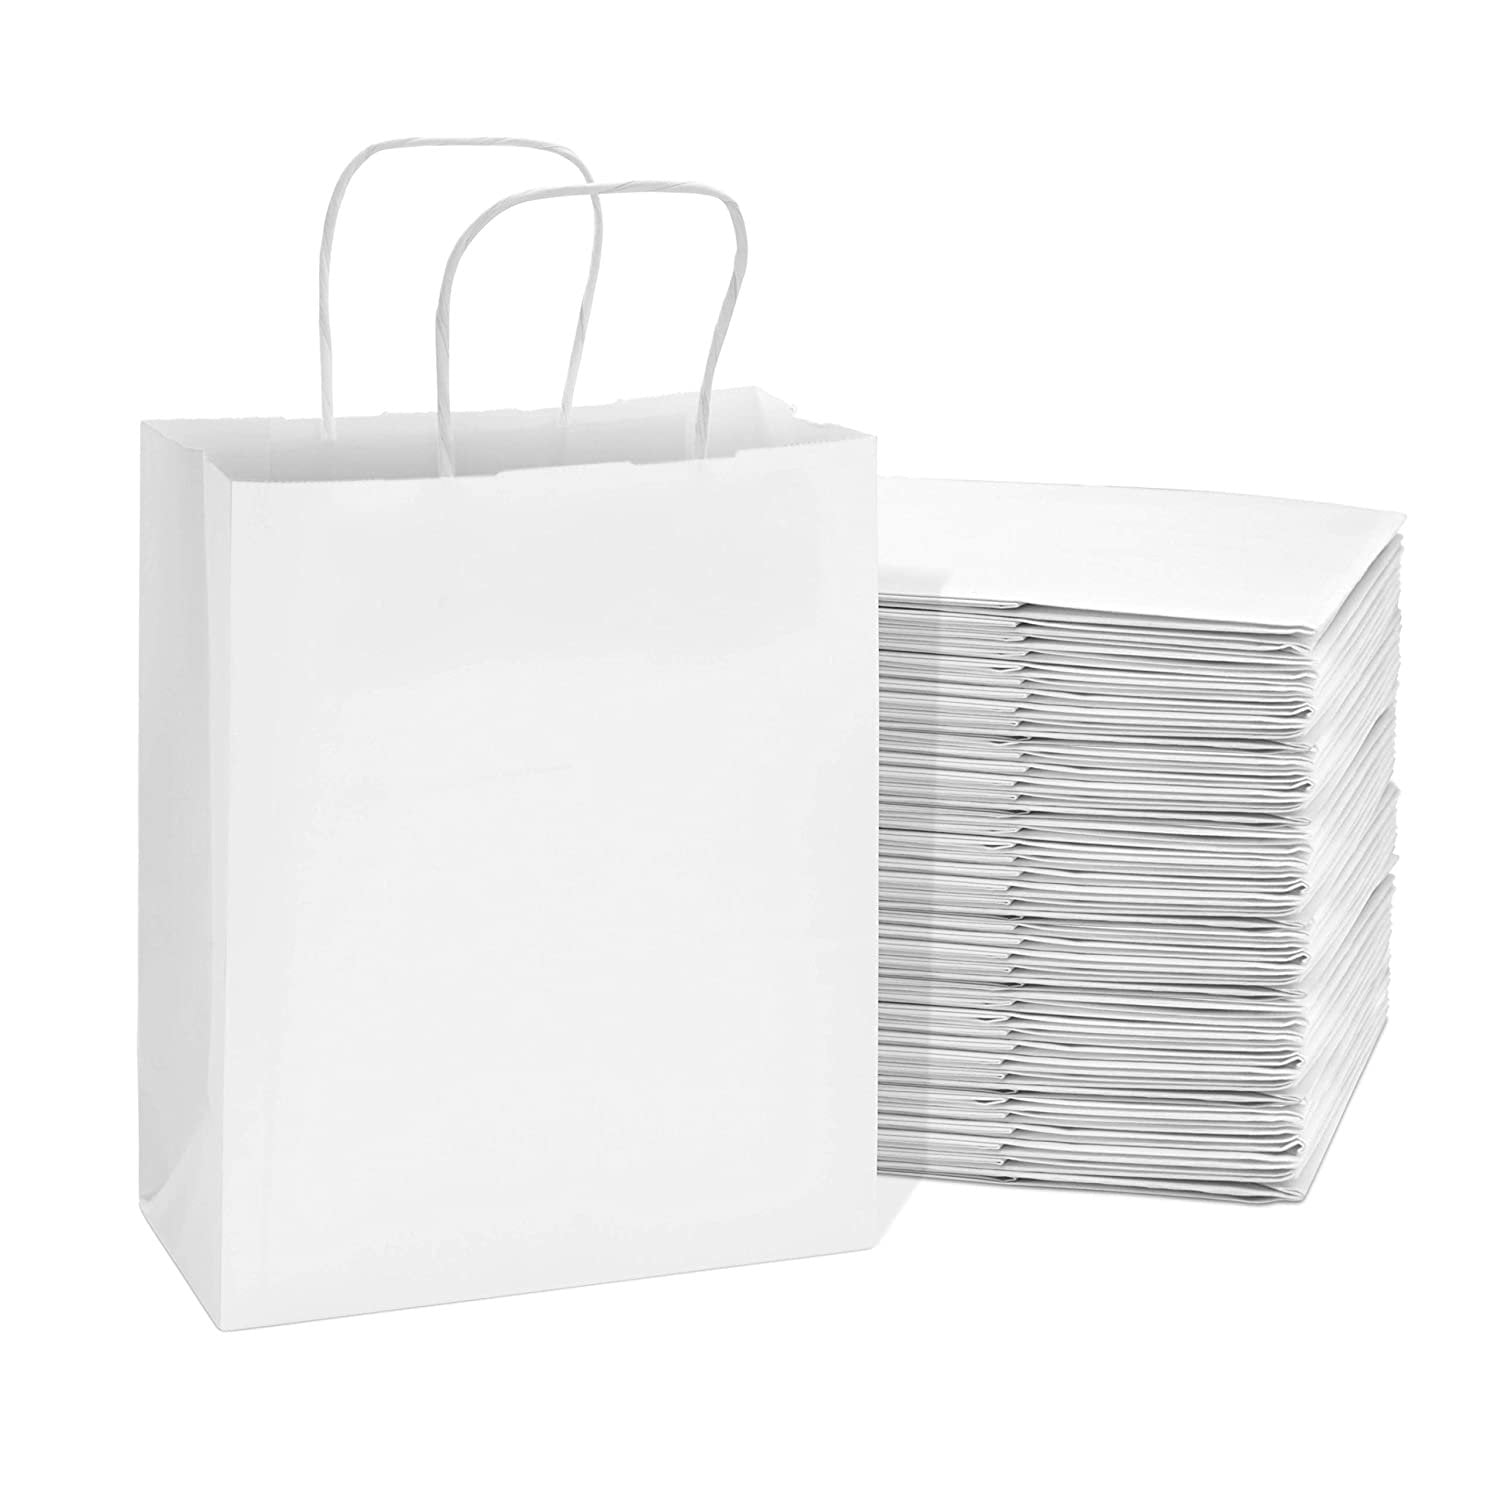 SHIPKEY 10 Pcs White Gift Bags (8x4x11 Inches) Gift Bags with Black Tissue  Paper | Luxury Matte White Paper Bags with Handles Perfect for Birthday